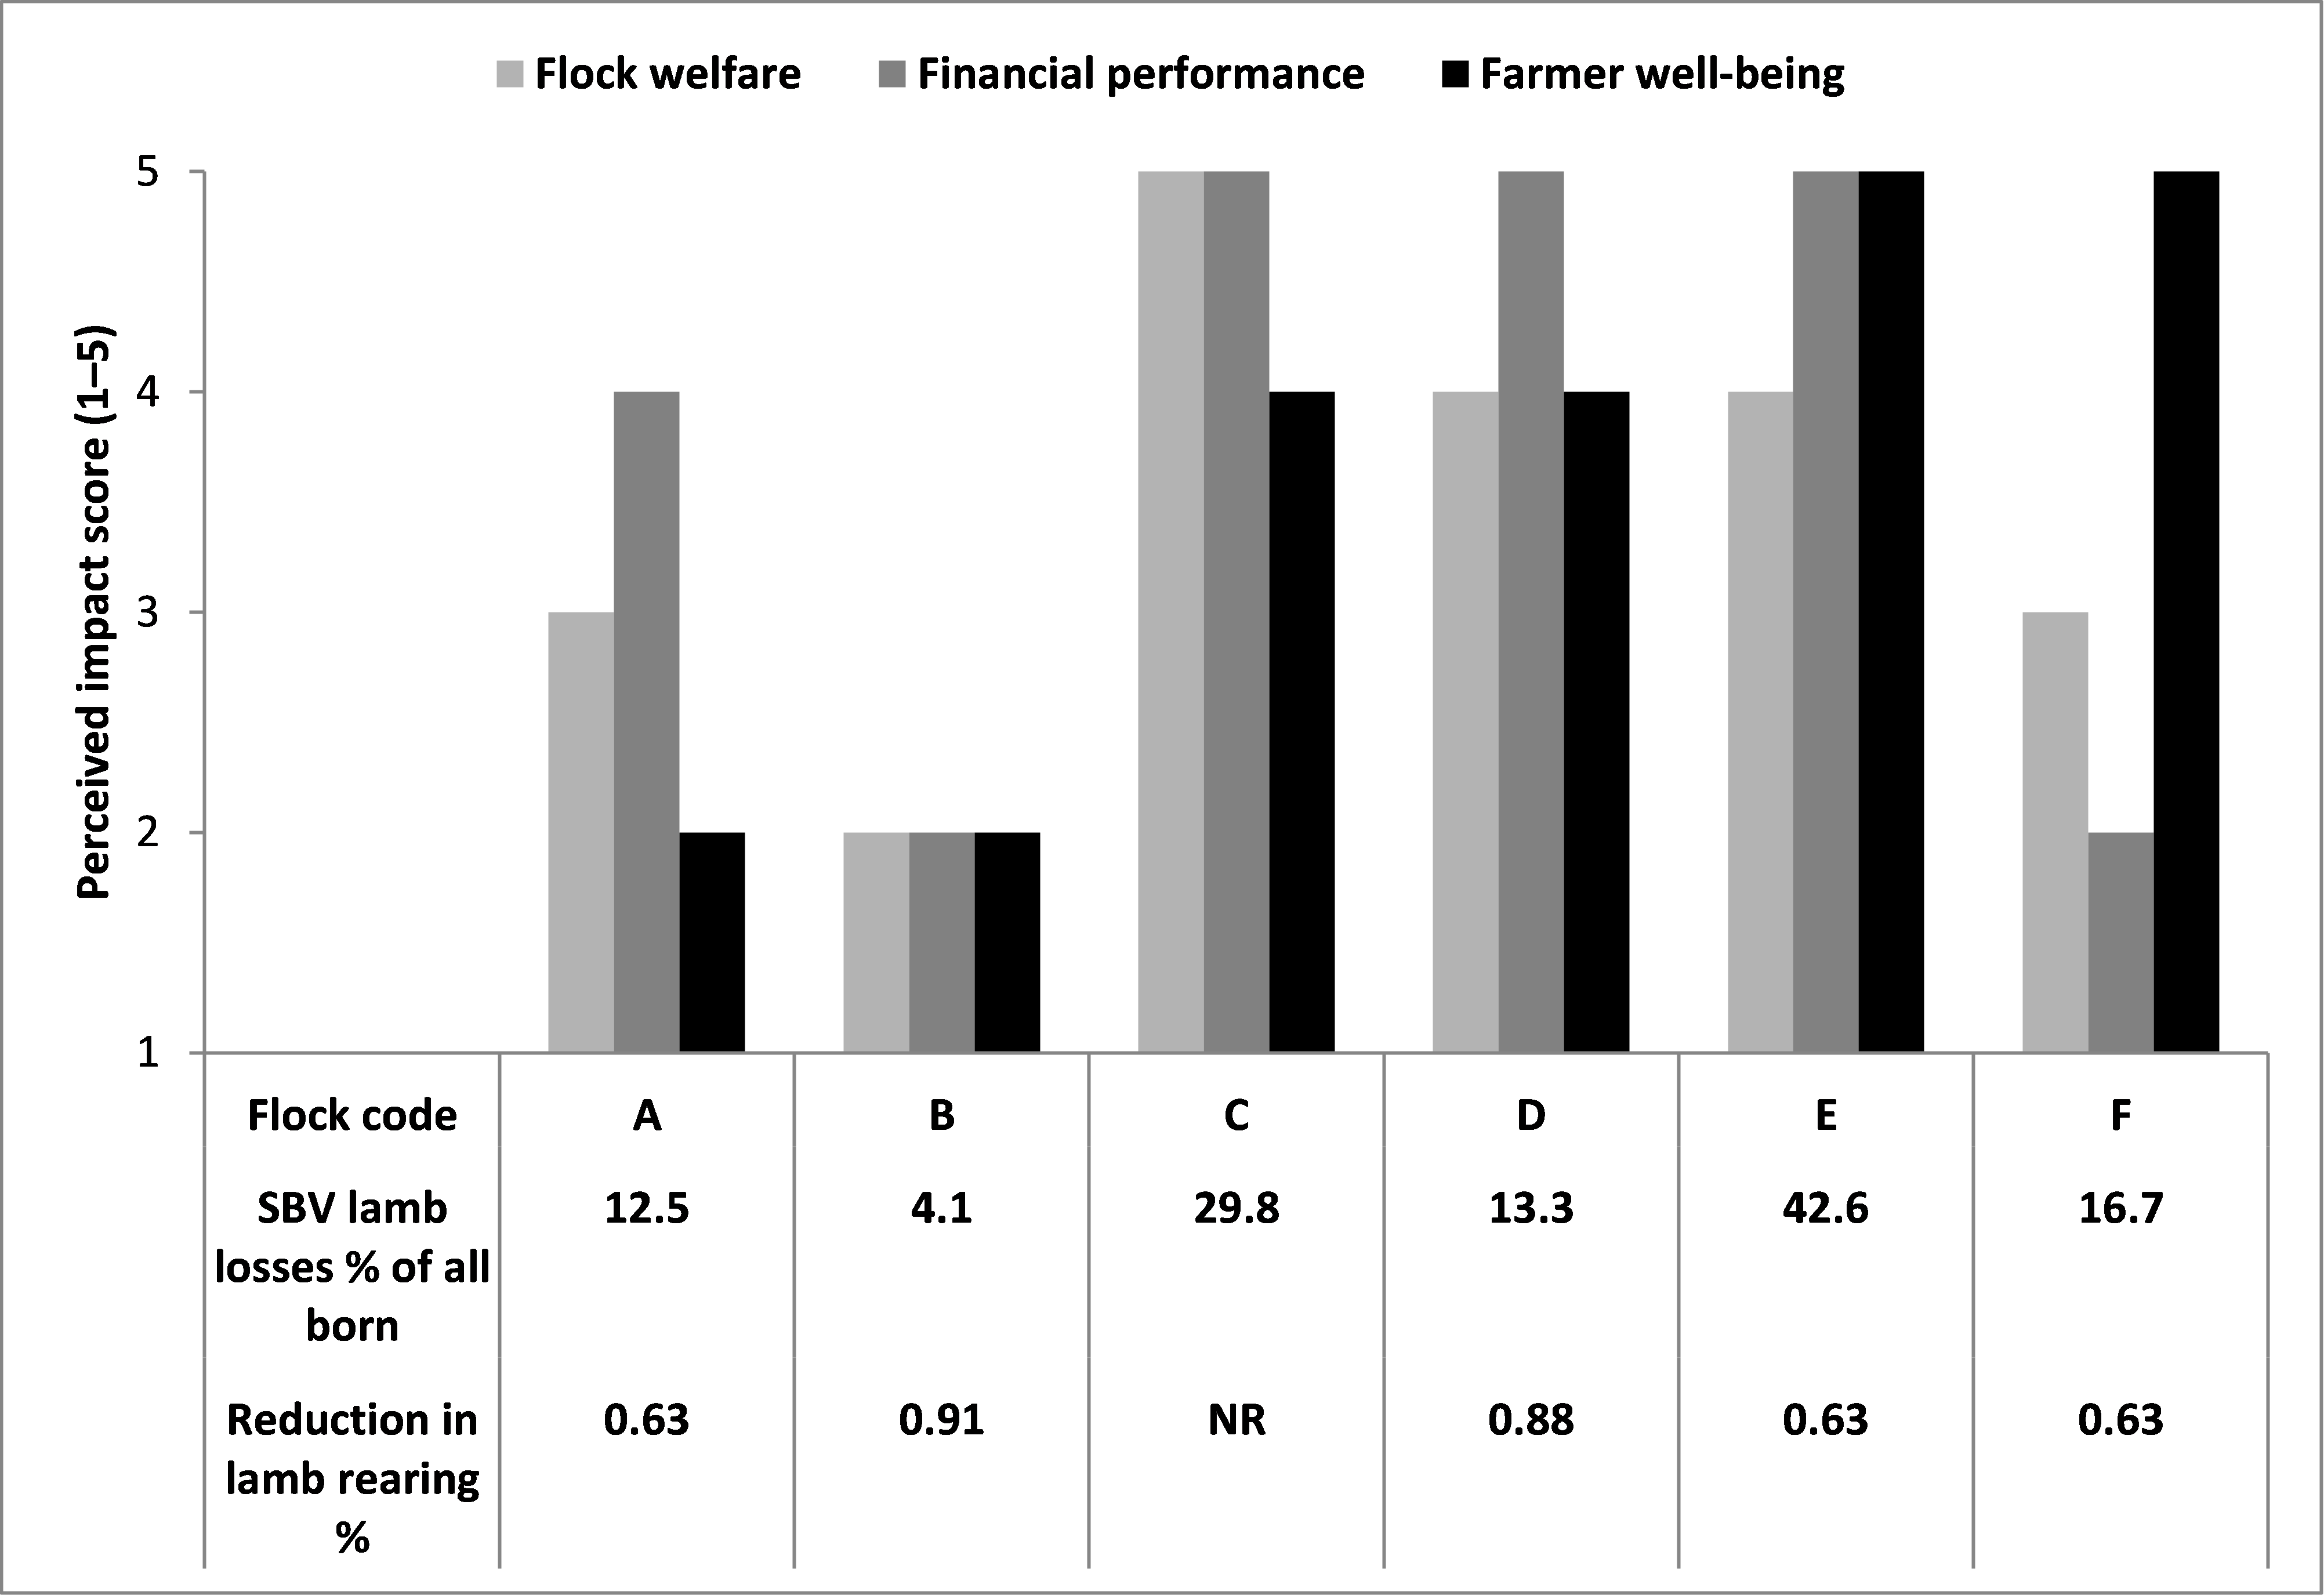 Figure 3. Farmers’ self-appraised severity scores of the negative impact of Schmallenberg virus on flock welfare, financial performance, and their emotional well-being (rated from 1 = no impact; to 5 = high impact (Harris et al., 2014) by SBV lamb losses and rearing percentage reduction factor (NR = not recorded) in six pedigree or purebred flocks (labelled A to F) during the 2012/2013 early lambing season